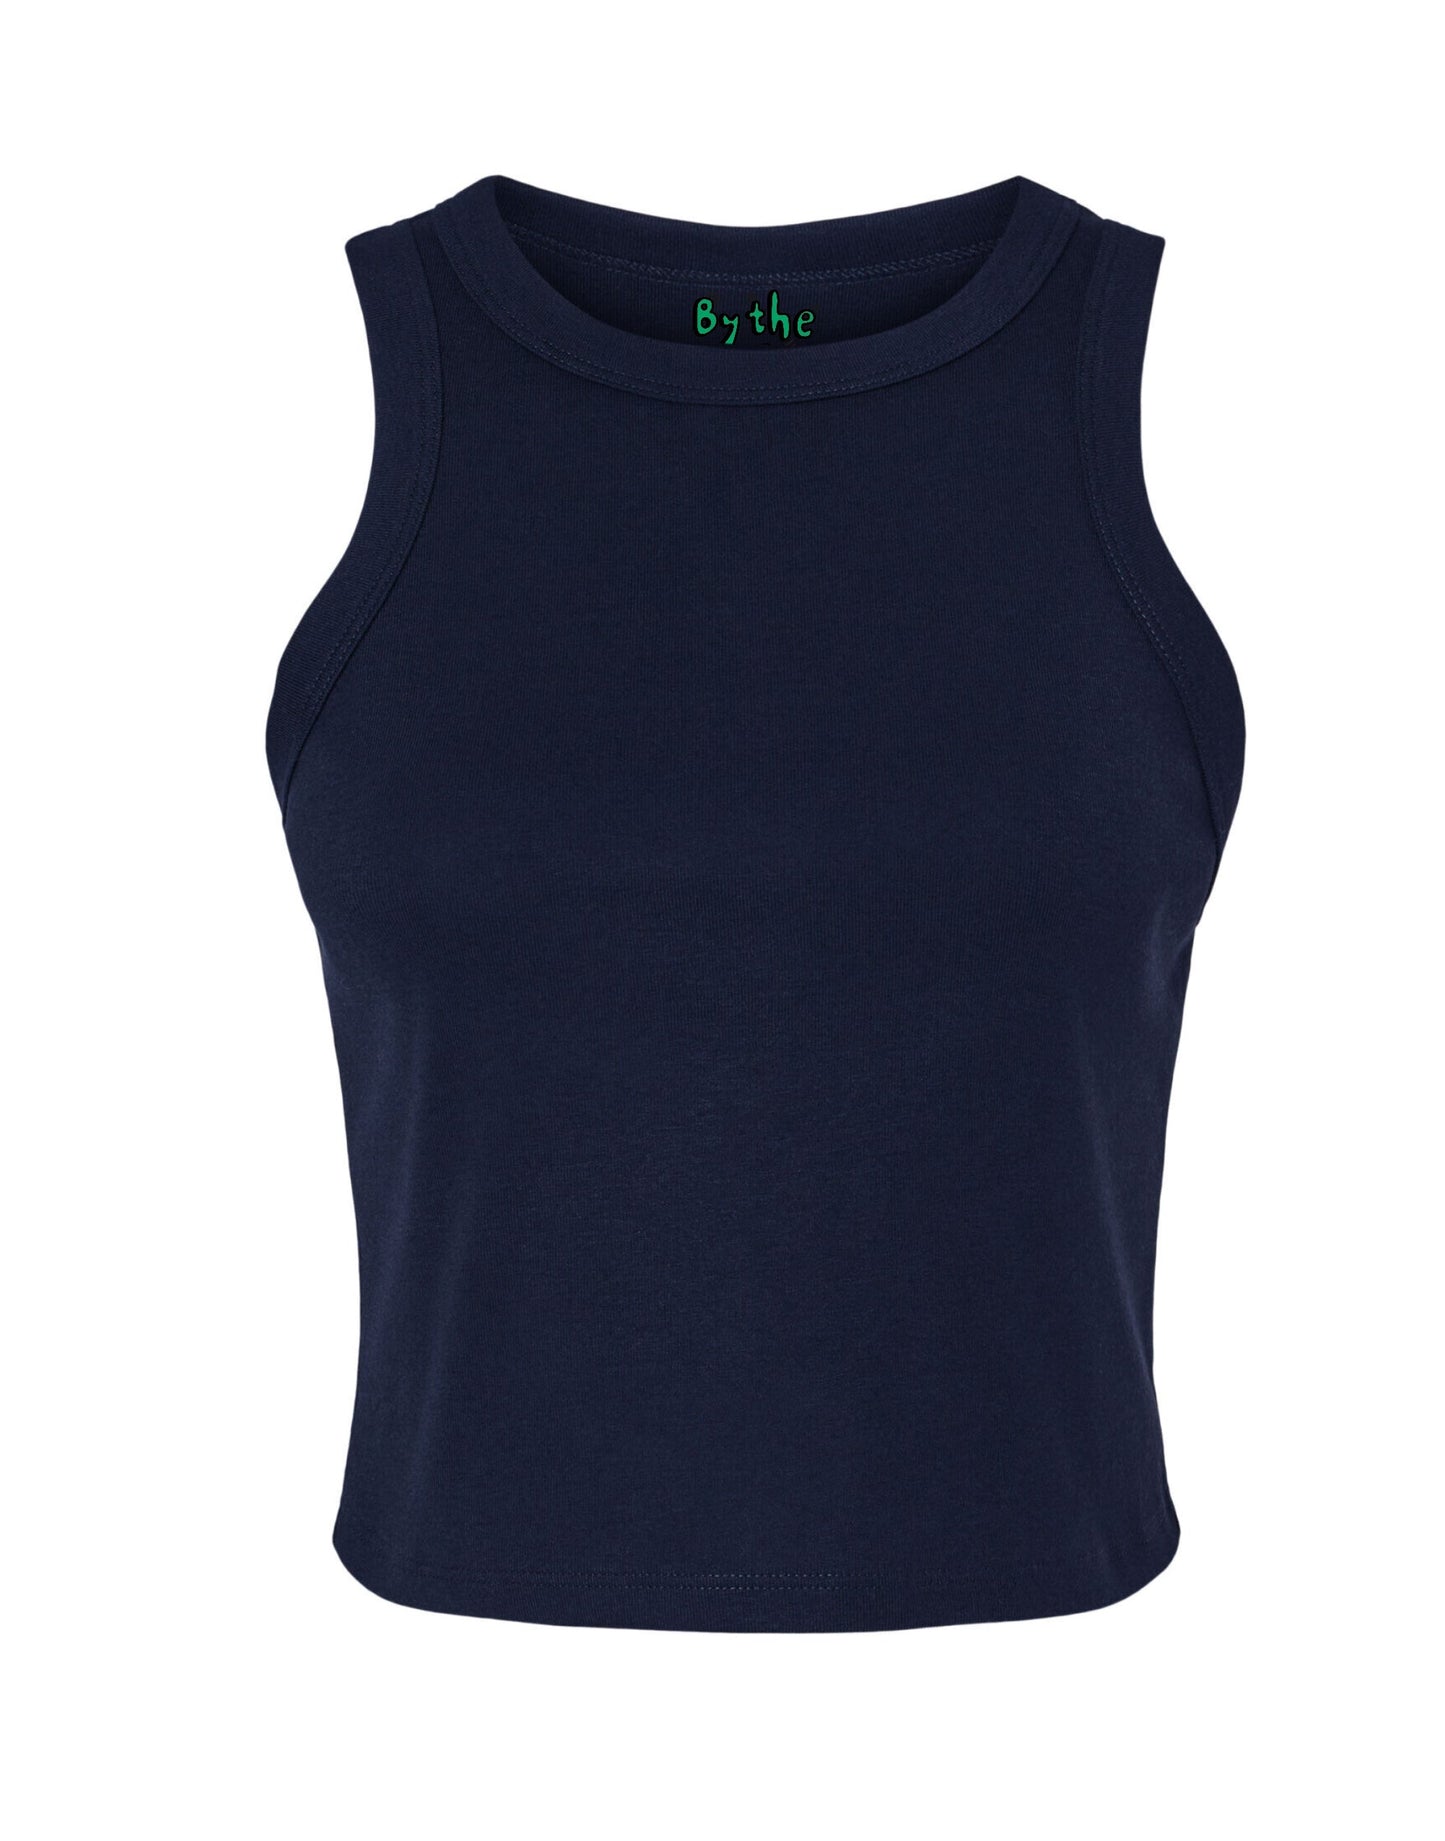 Navy Racer Top SMALL